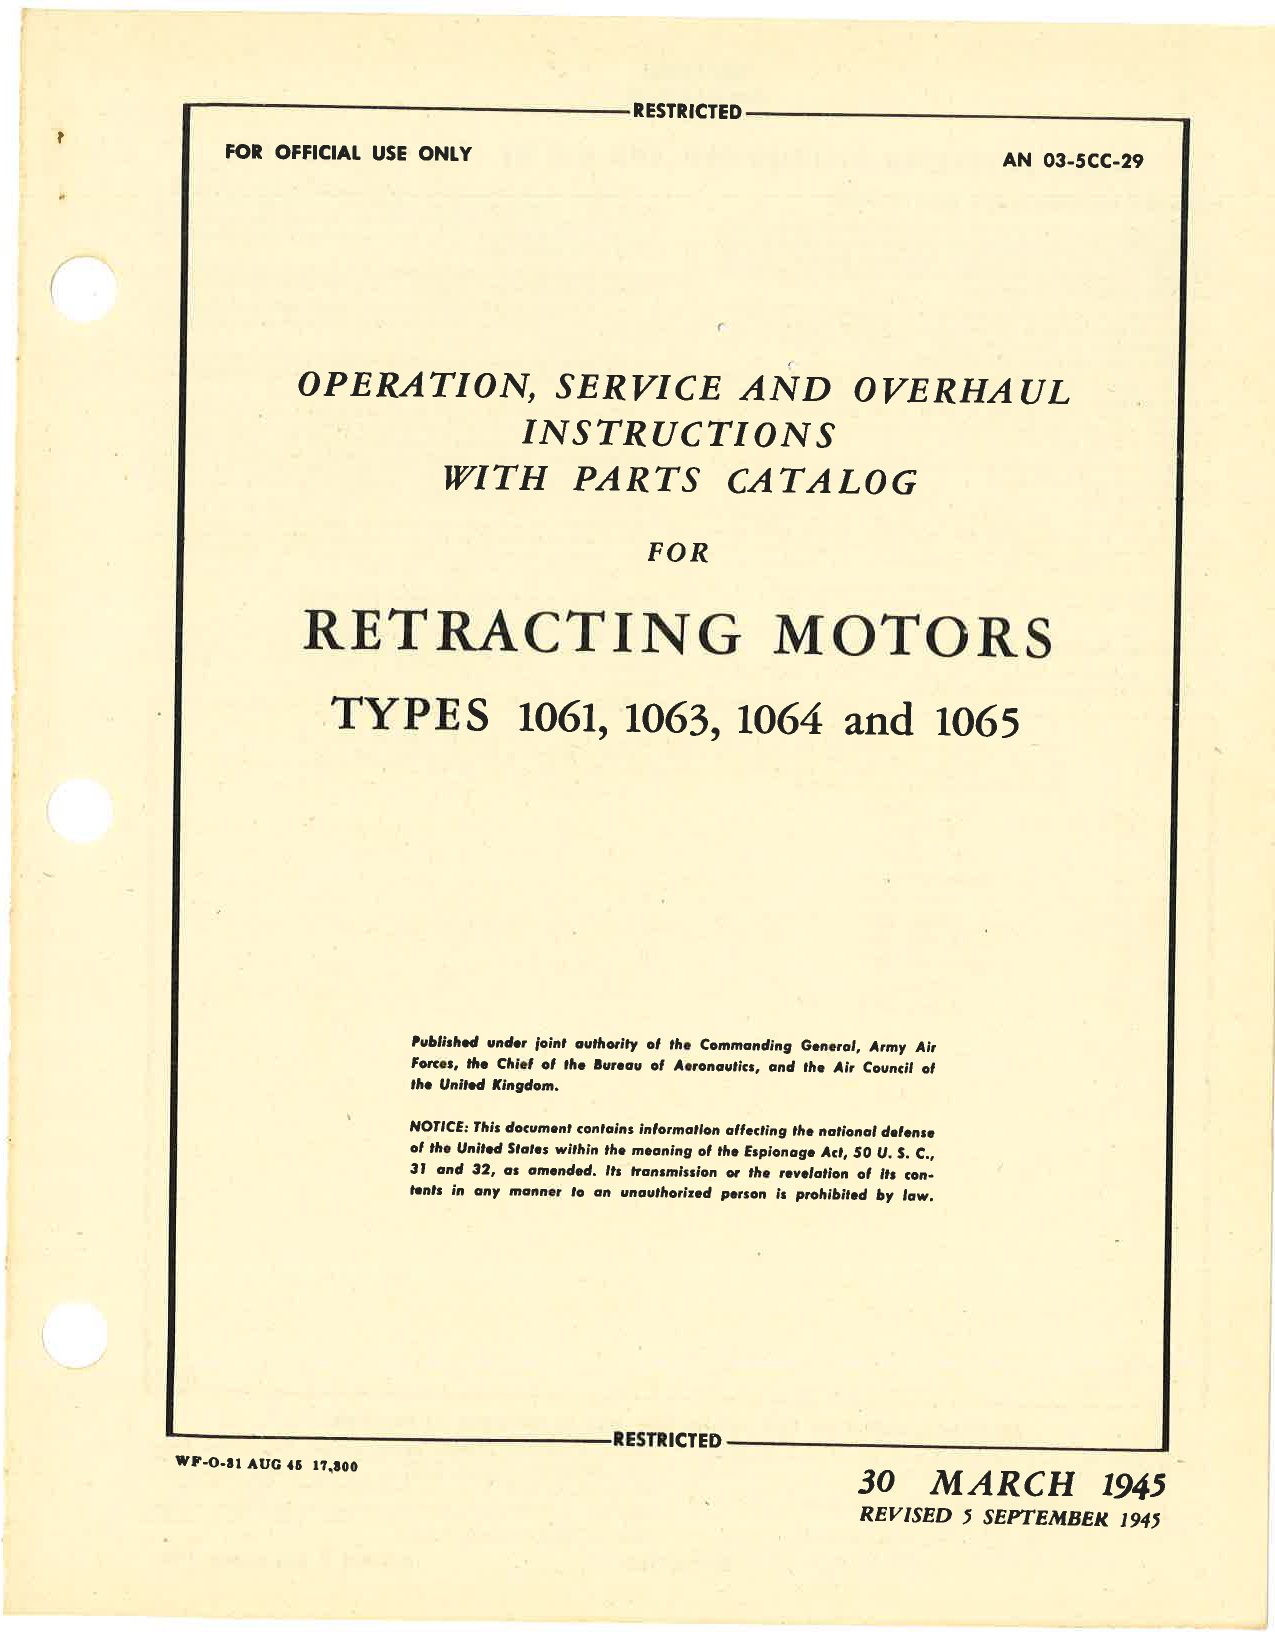 Sample page 1 from AirCorps Library document: Operation, Service & Overhaul Instructions with Parts Catalog for Retracting Motors